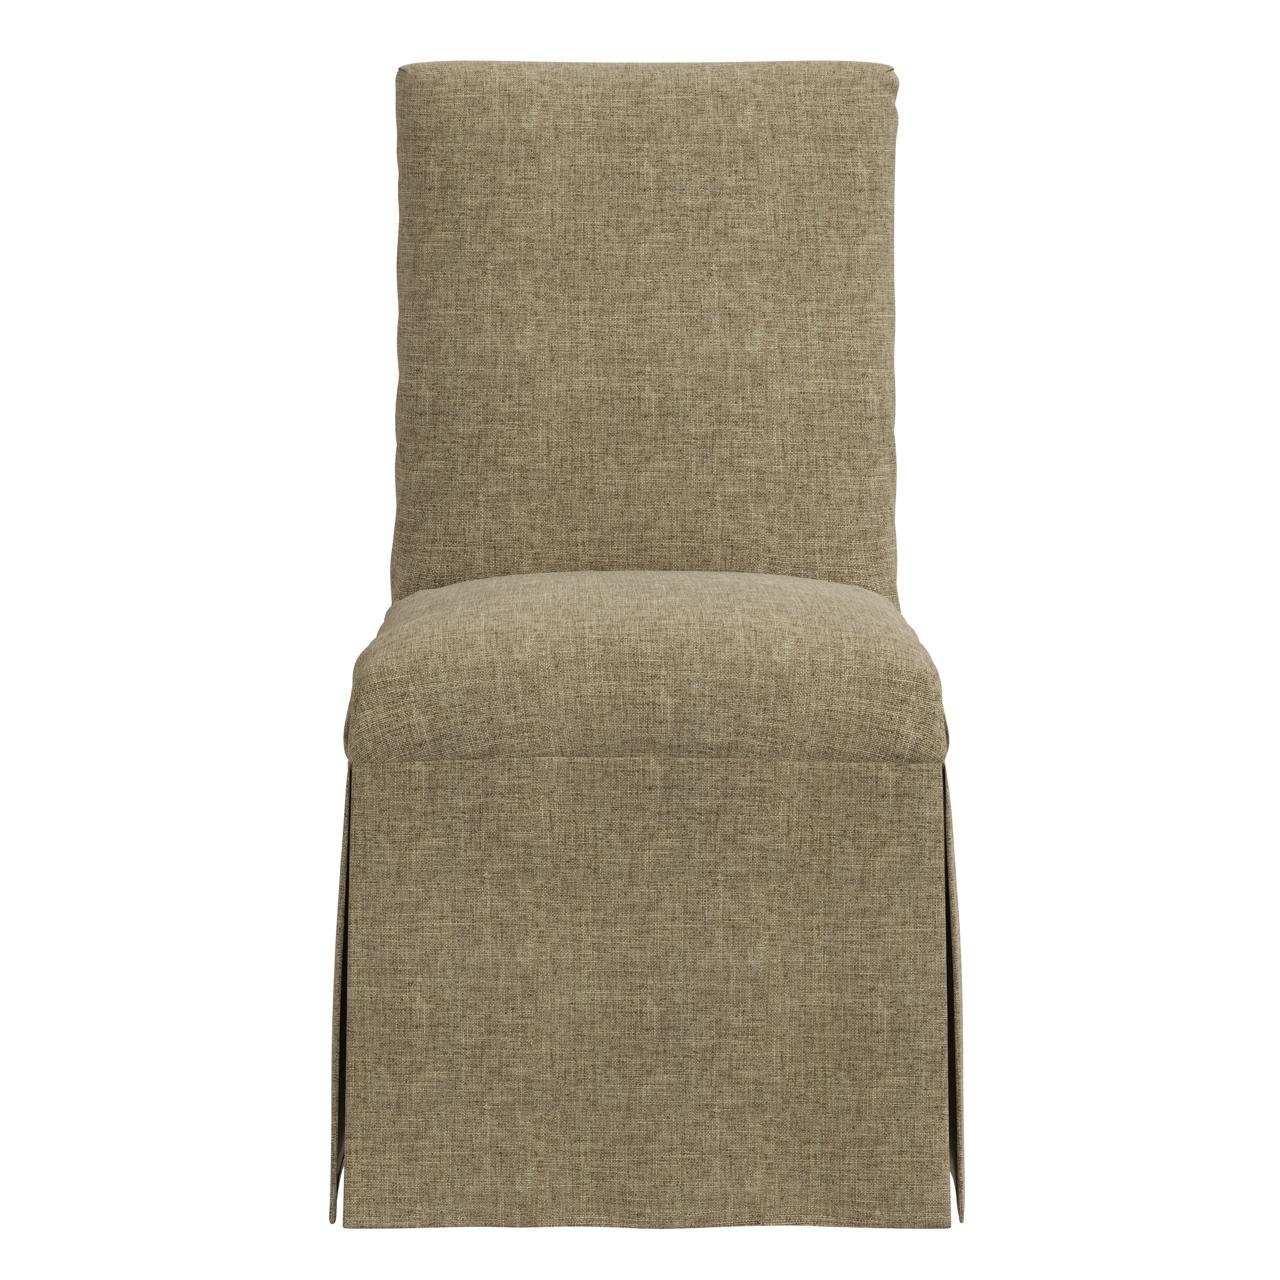 Alice Slipcover Dining Chair in Zuma Linen - Image 1